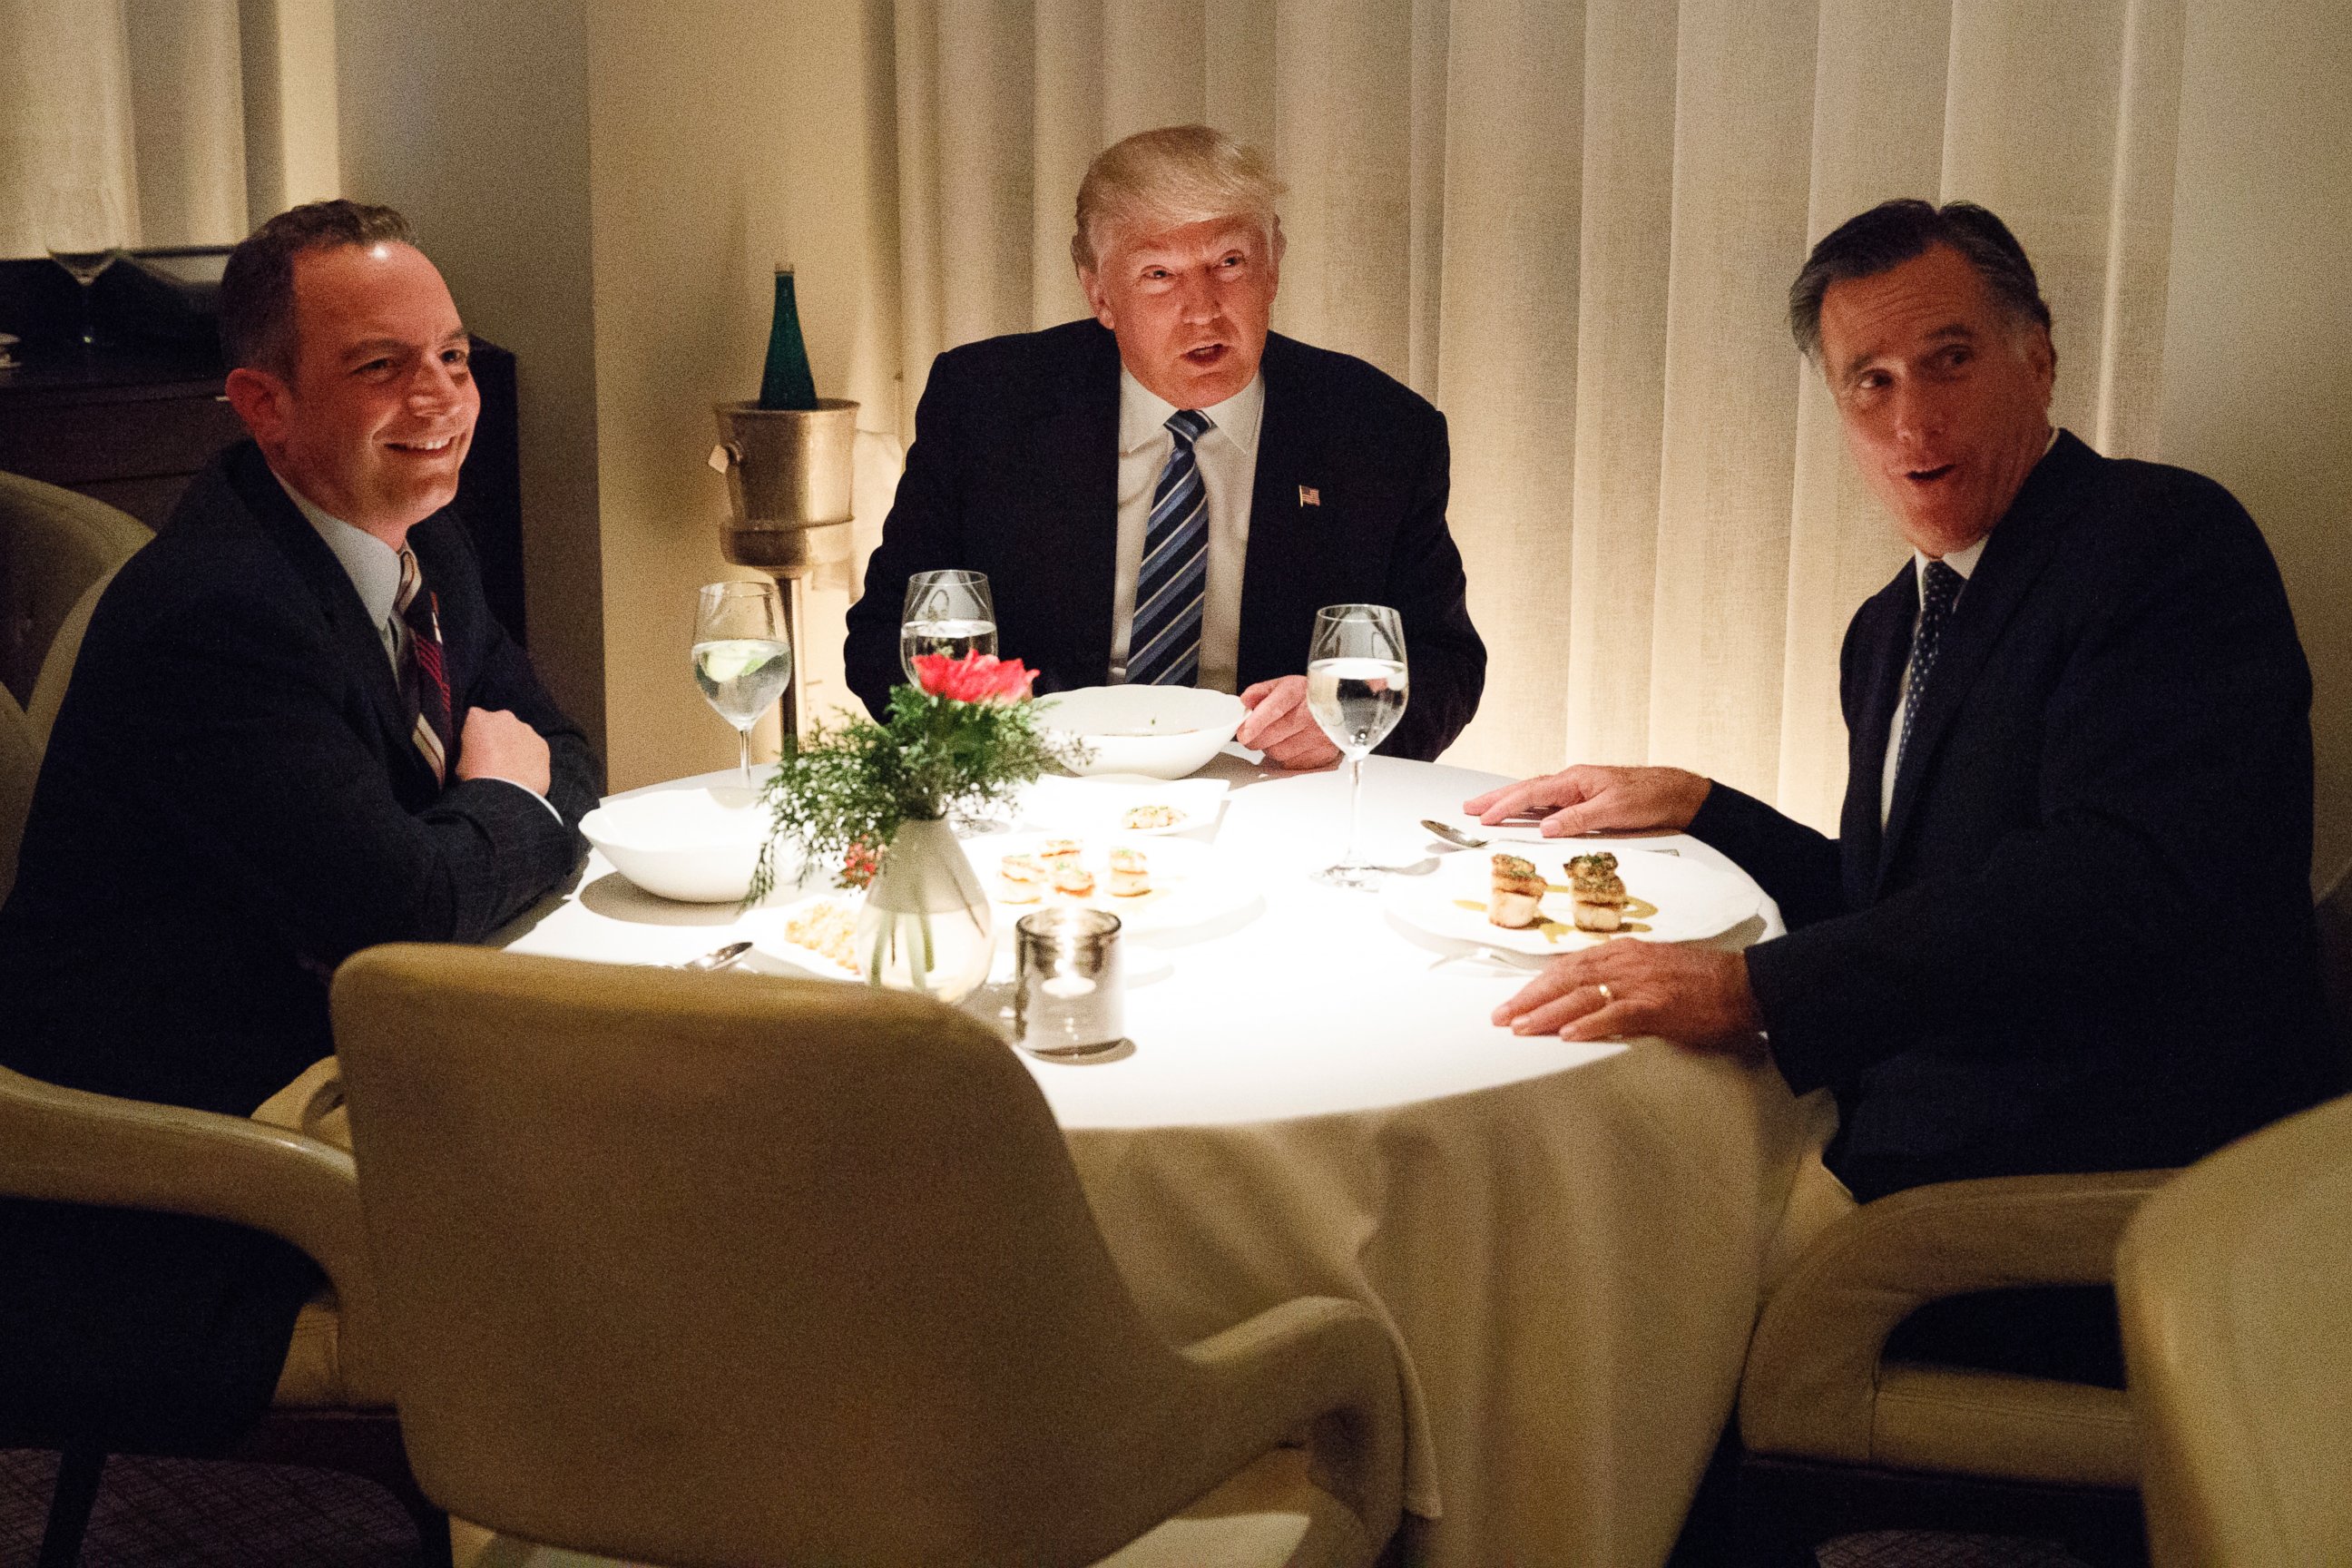 PHOTO: Donald Trump, center, eats dinner with Mitt Romney, right, and Trump Chief of Staff Reince Priebus at Jean-Georges restaurant, Nov. 29, 2016, in New York. 